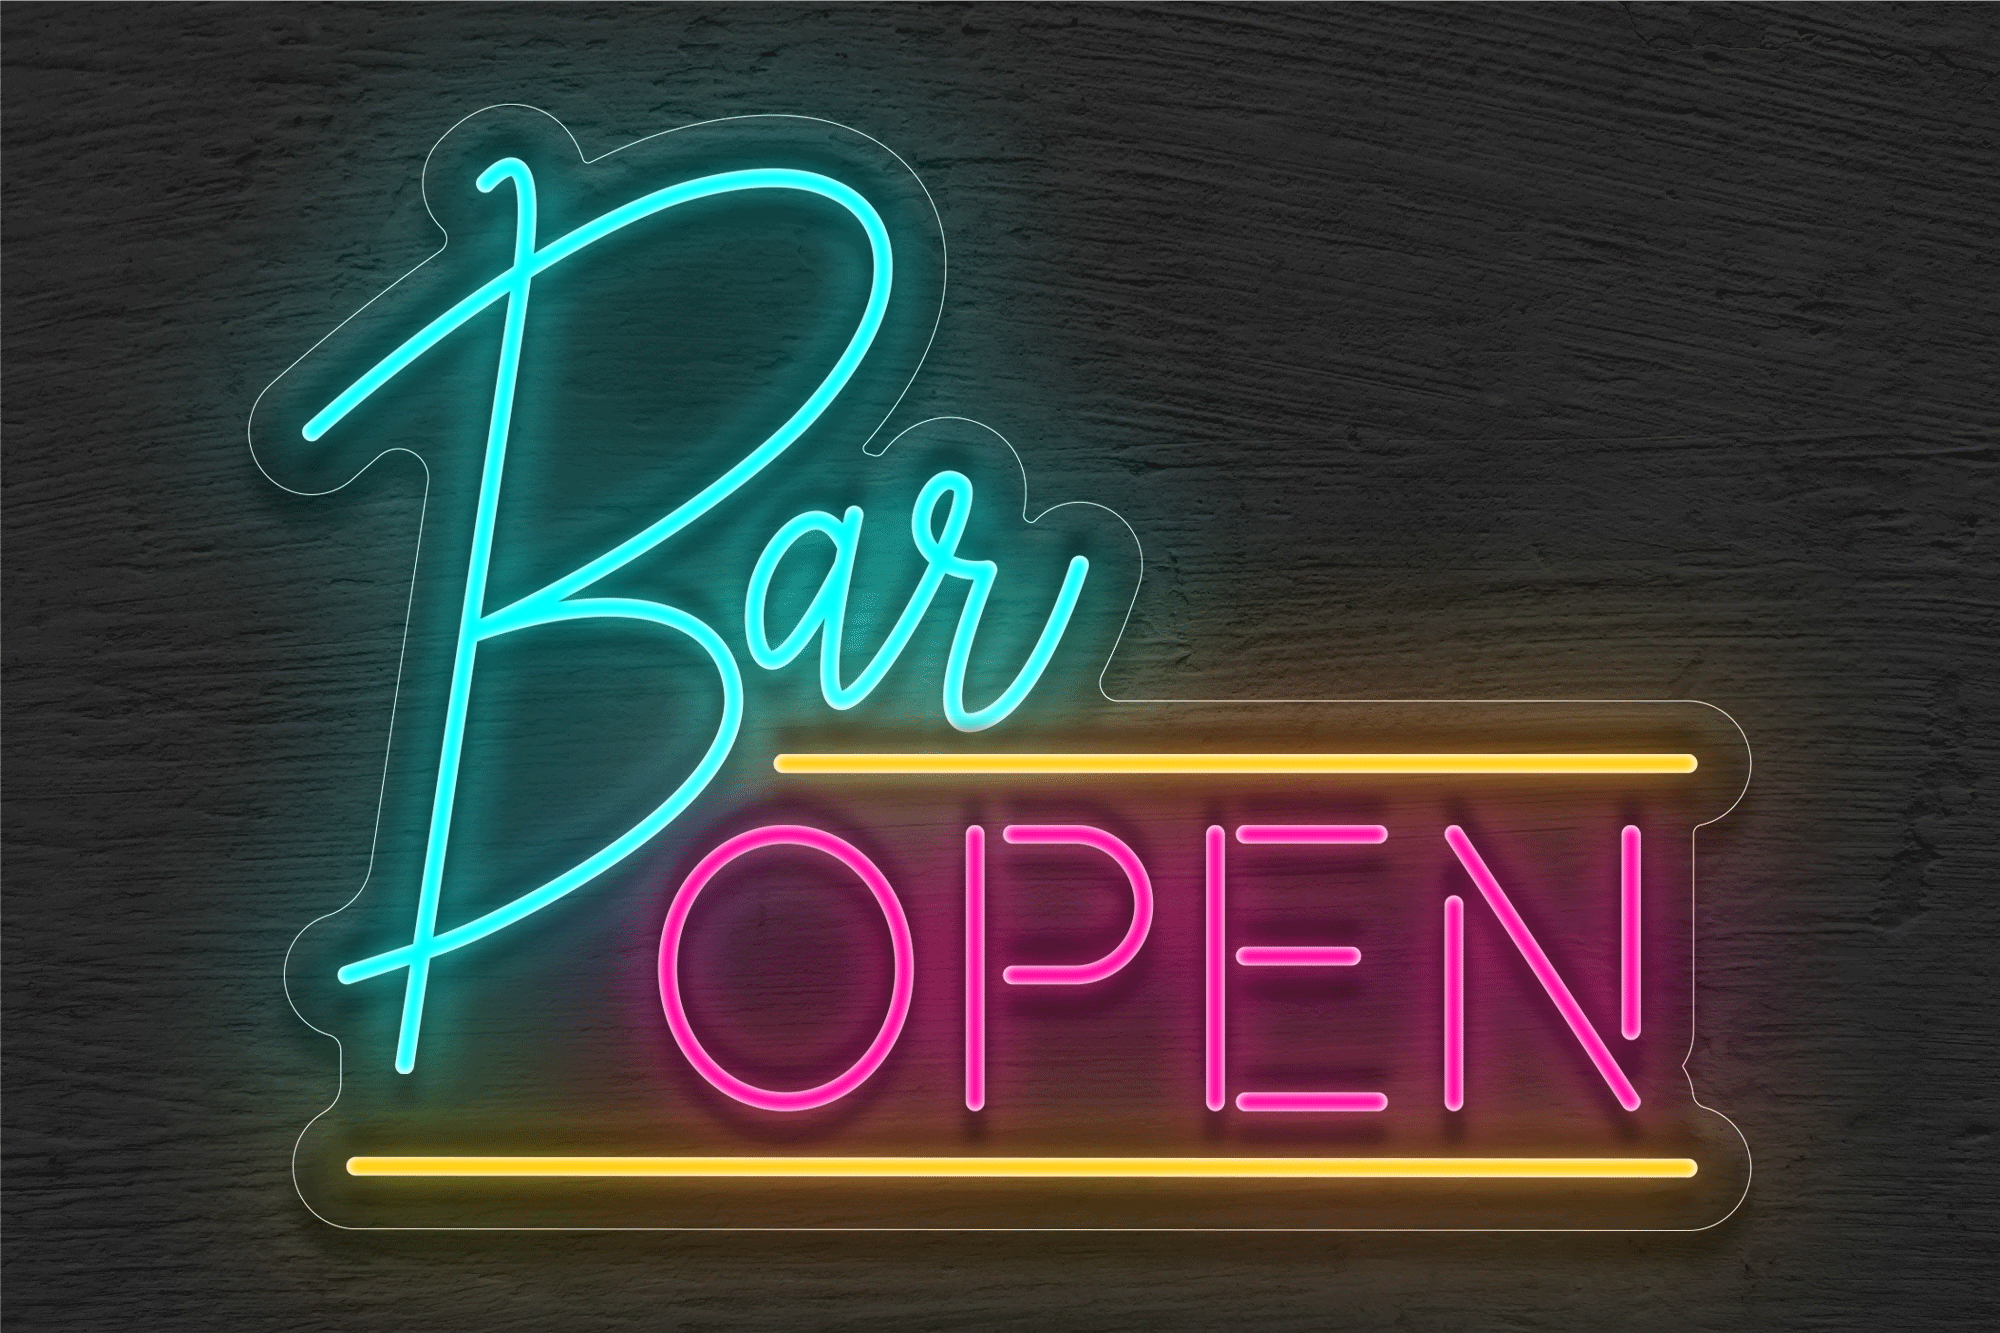 Buy Multi-color Bar OPEN with Two Lines LED Neon Sign